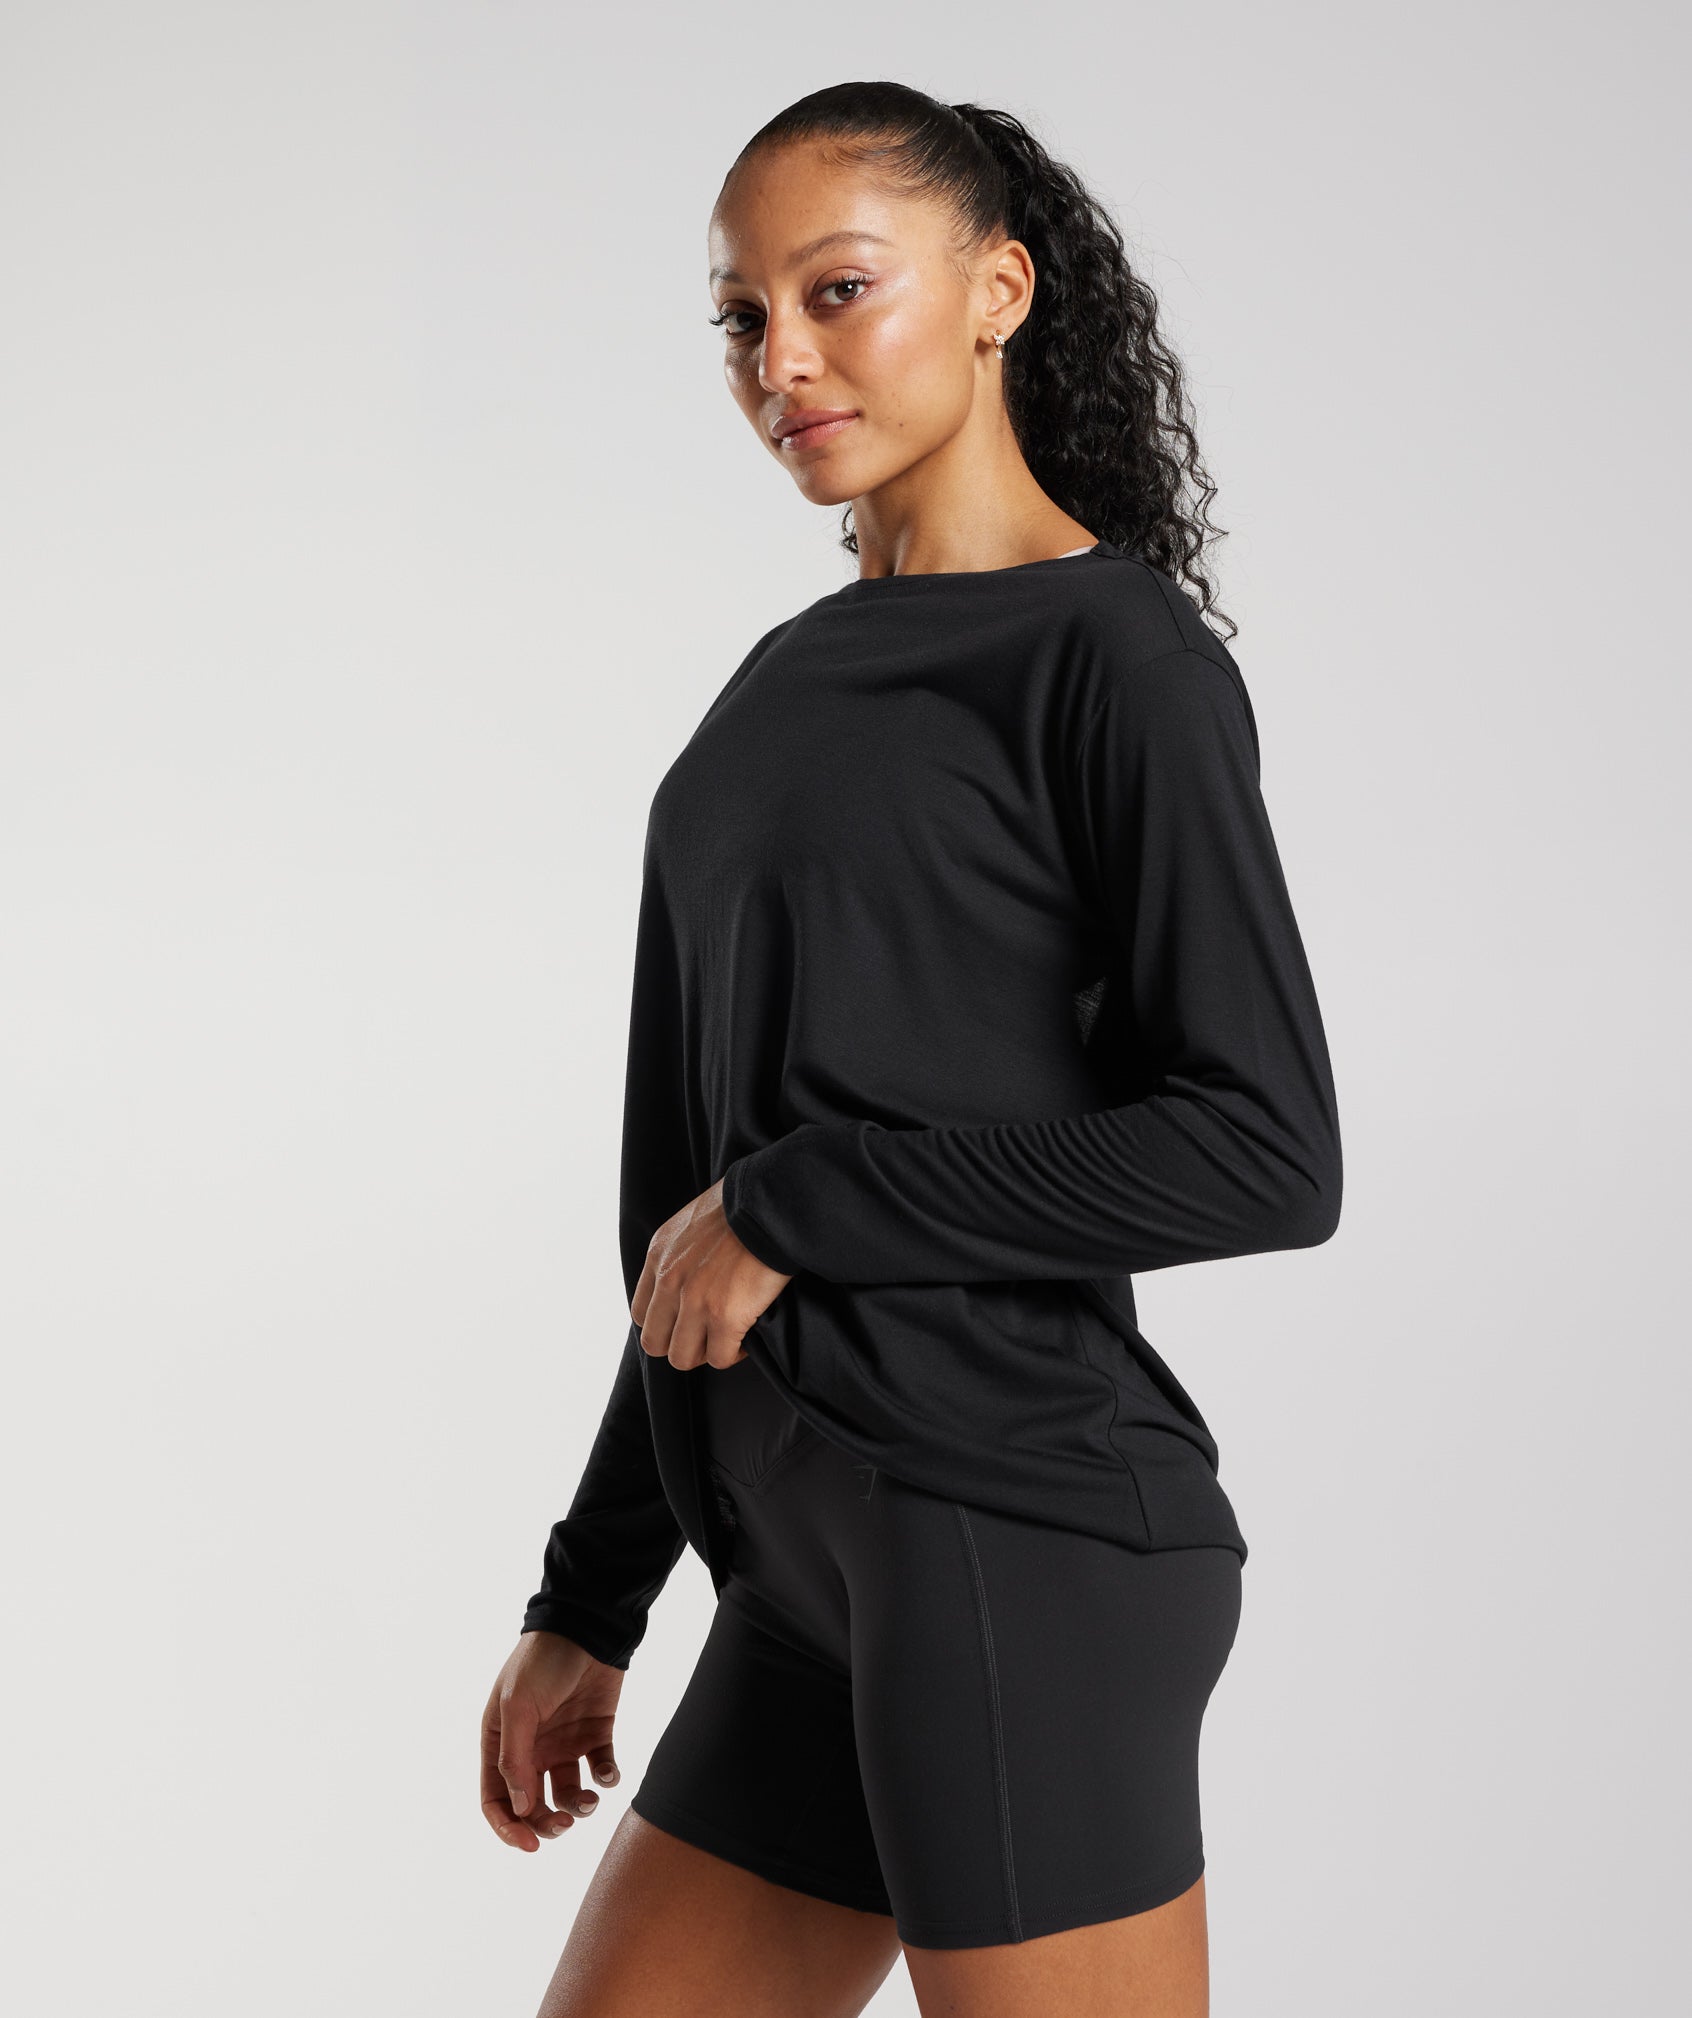 Super Soft Cut-Out Long Sleeve Top in Black - view 3